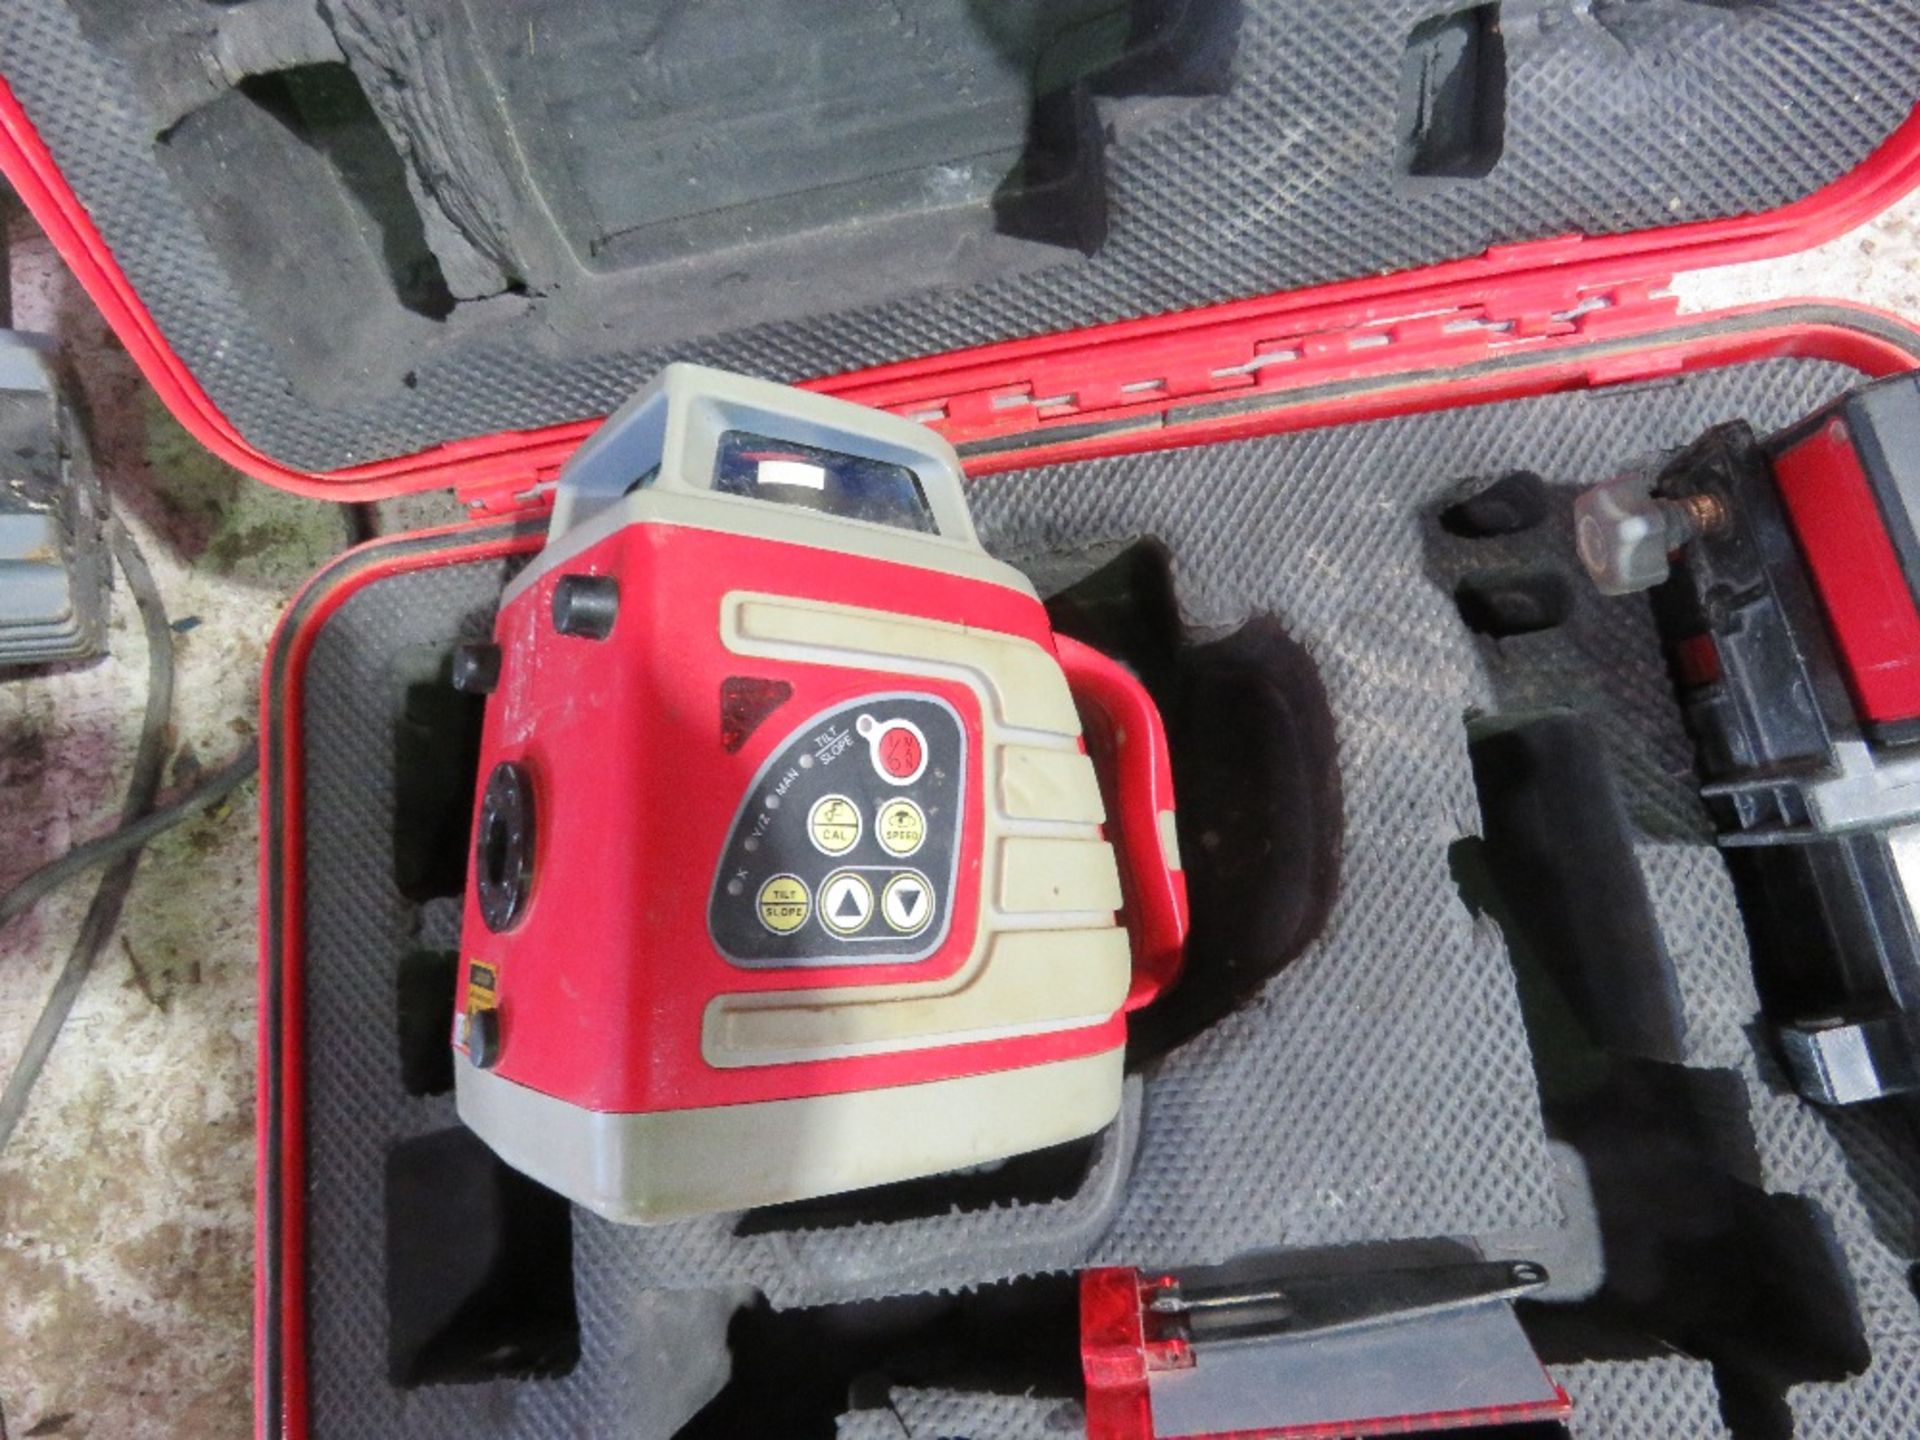 DATUM ROTARY LASER LEVEL IN A CASE. - Image 3 of 4